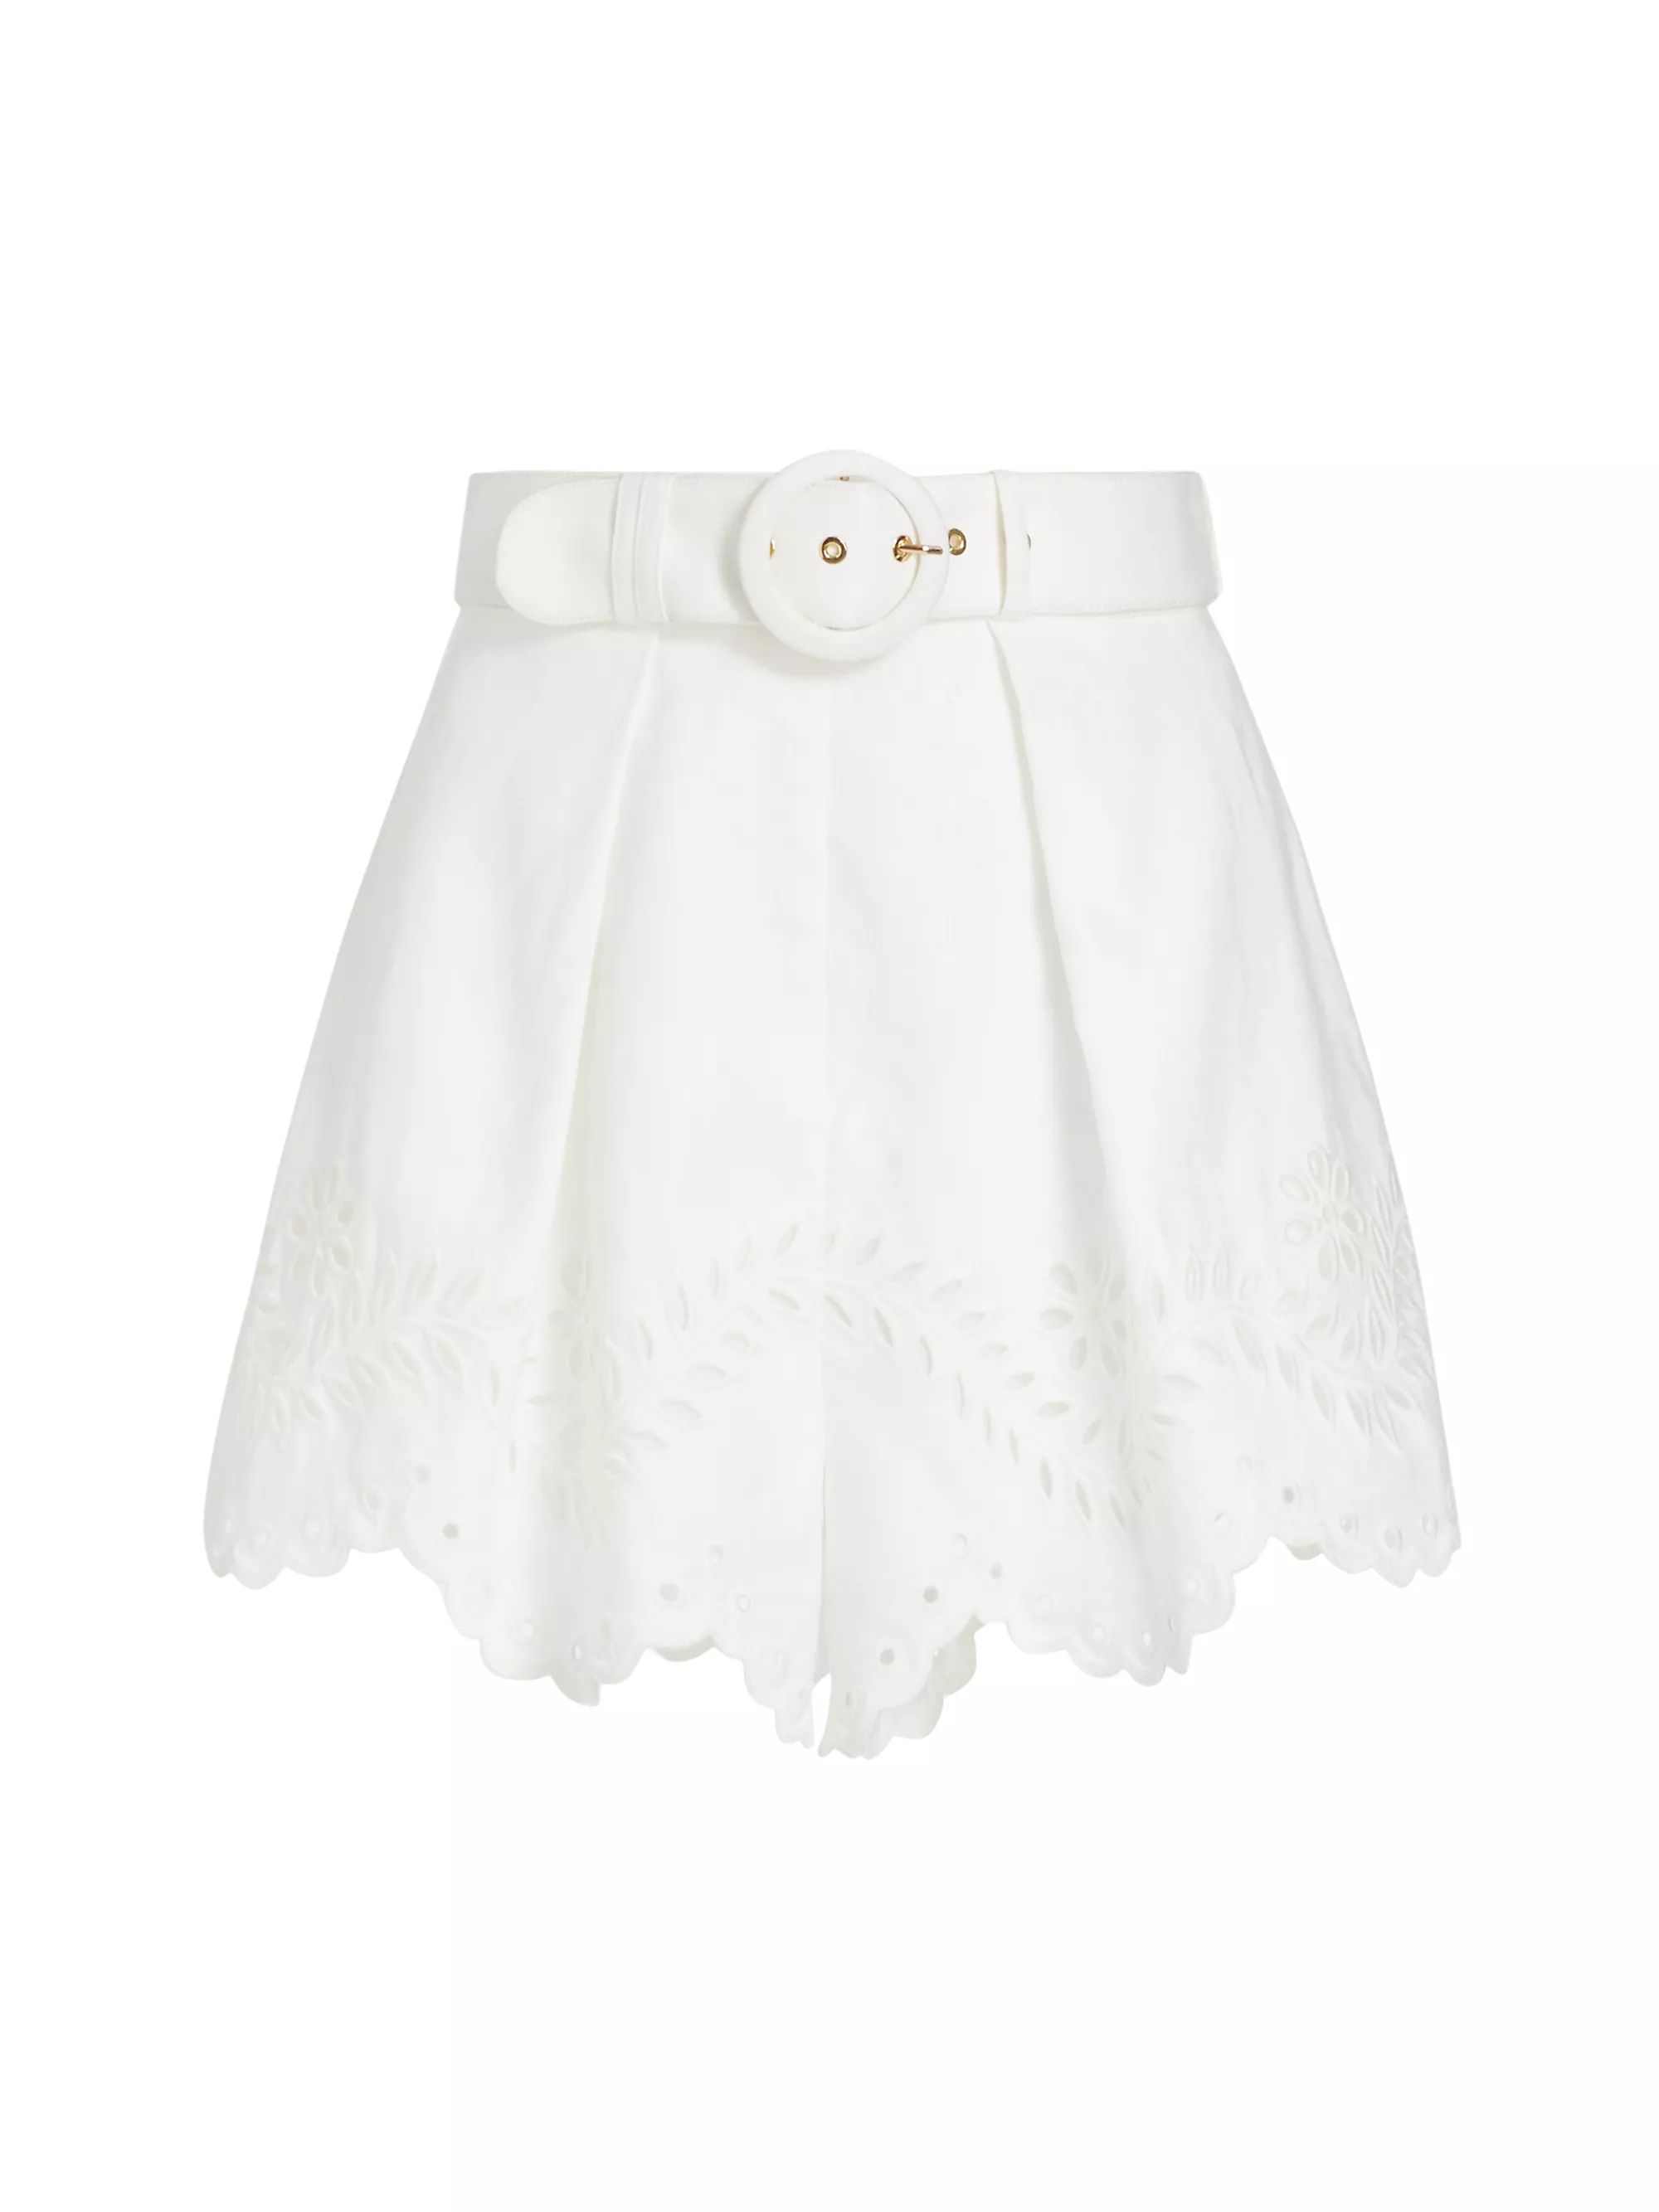 Junie Belted Eyelet-Embroidered Linen Shorts | Saks Fifth Avenue